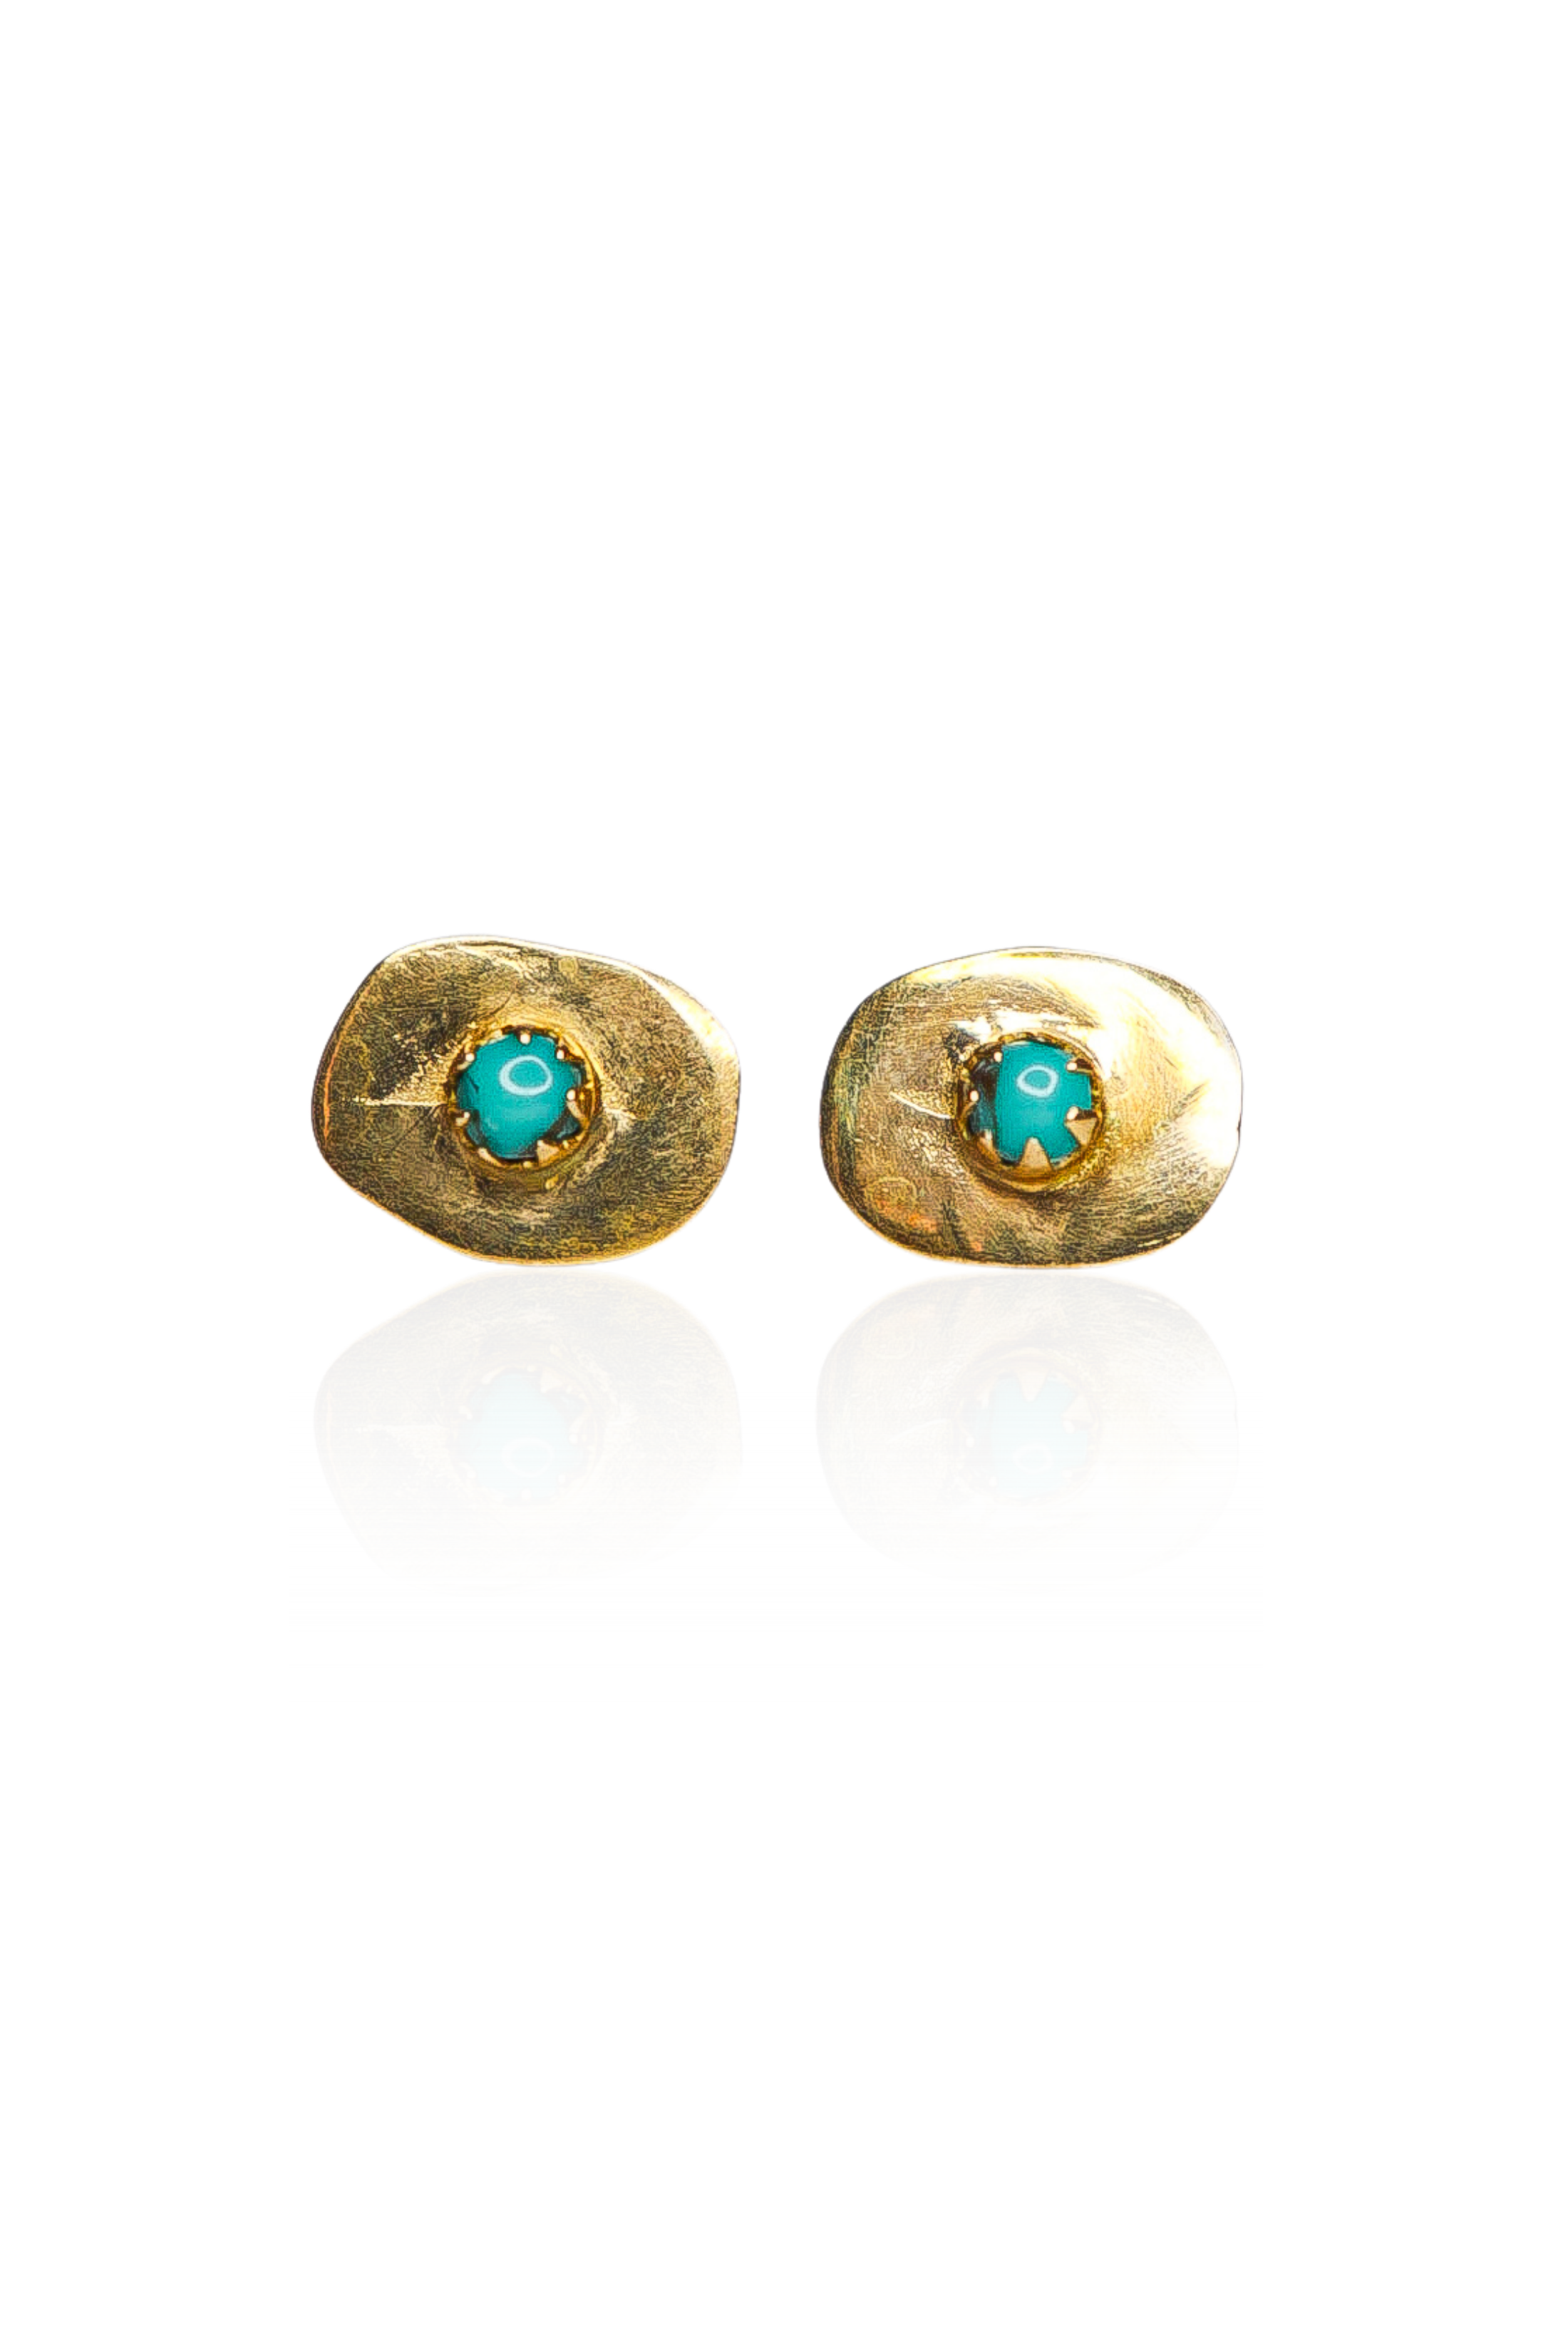 Effy Diamond Accent Genuine Blue Turquoise 14K Gold 14mm Oval Round Stud  Earrings - JCPenney